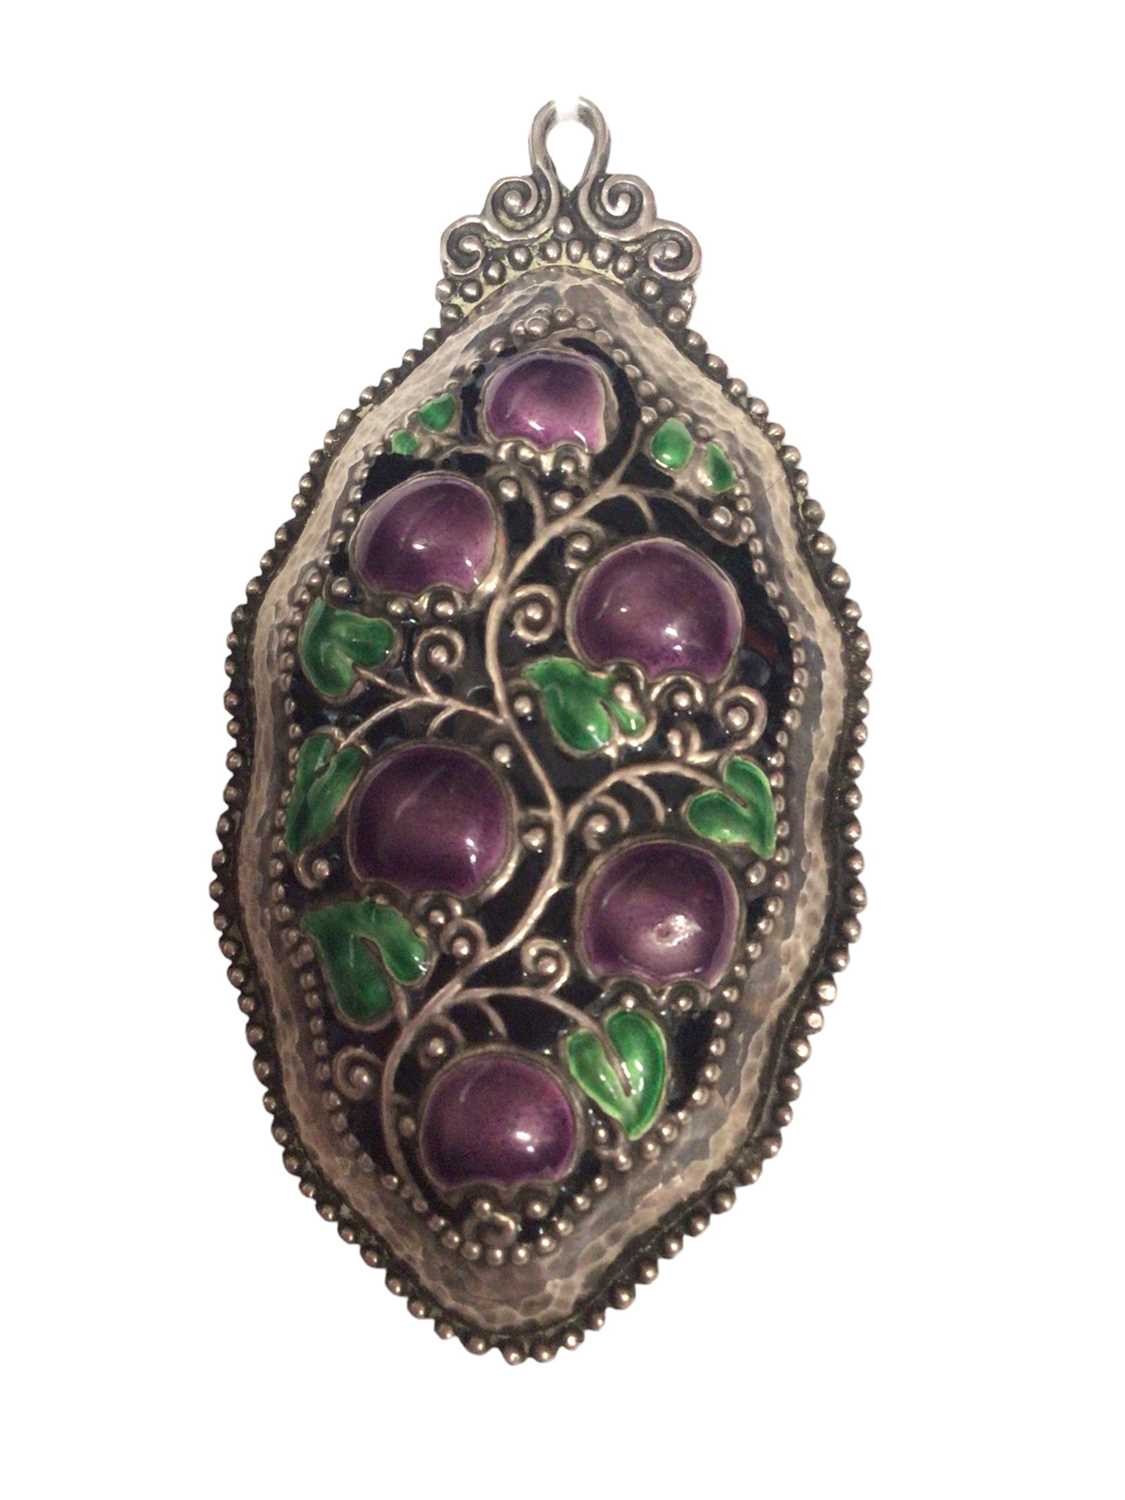 Continental silver (800) leaf shaped pendant with purple, green and black enamelled fruit decoration